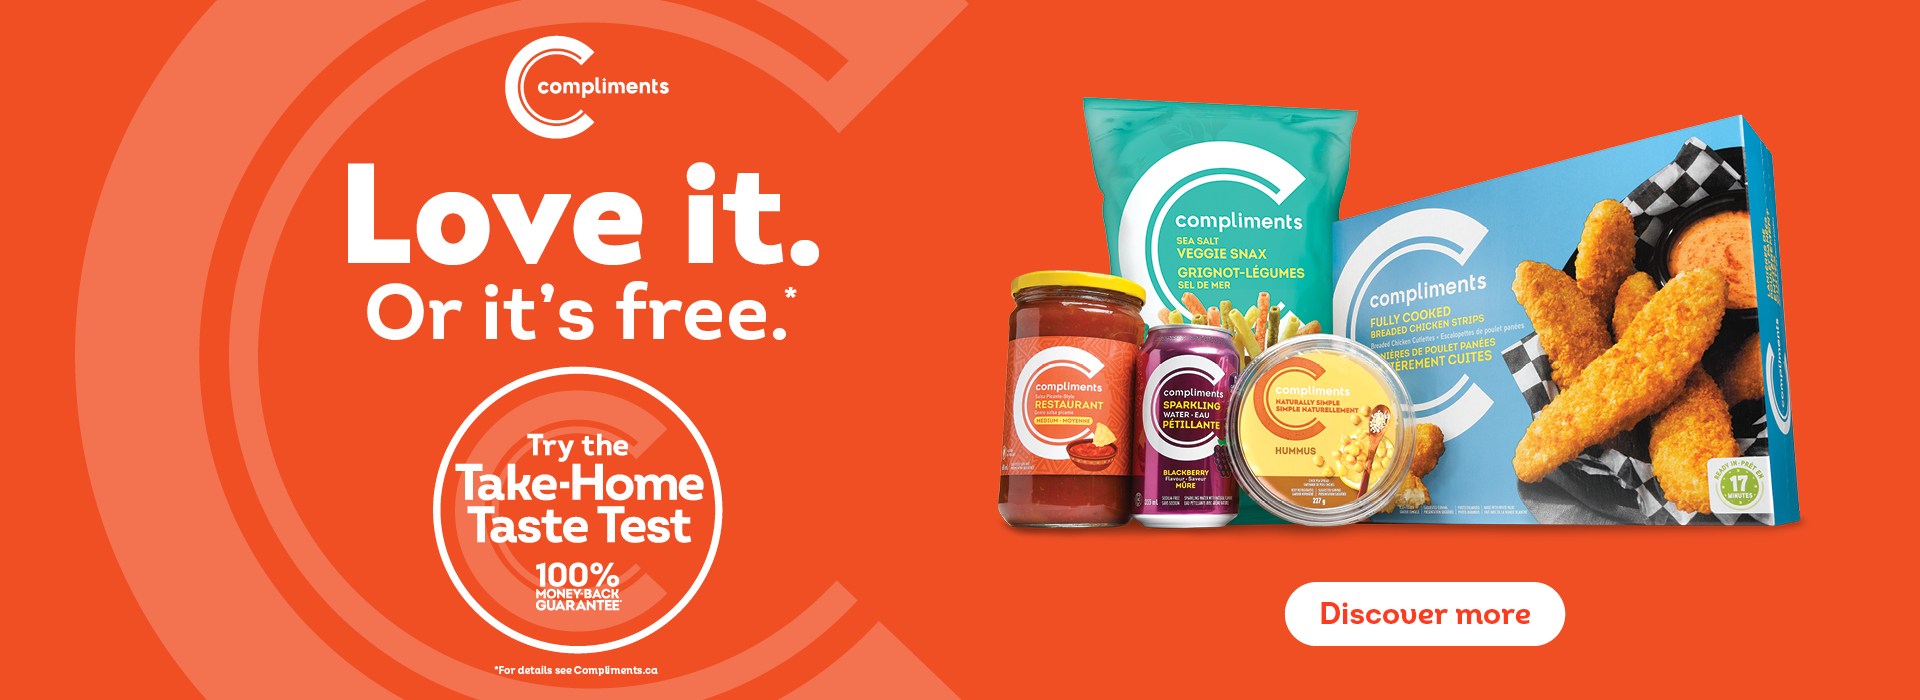 Text Reading “Compliments. Love it. Or it’s free. Try the Take-Home Taste Test with a 100% Money back guarantee. For details see Compliments.ca. Check out products from the ‘Discover more’ button”